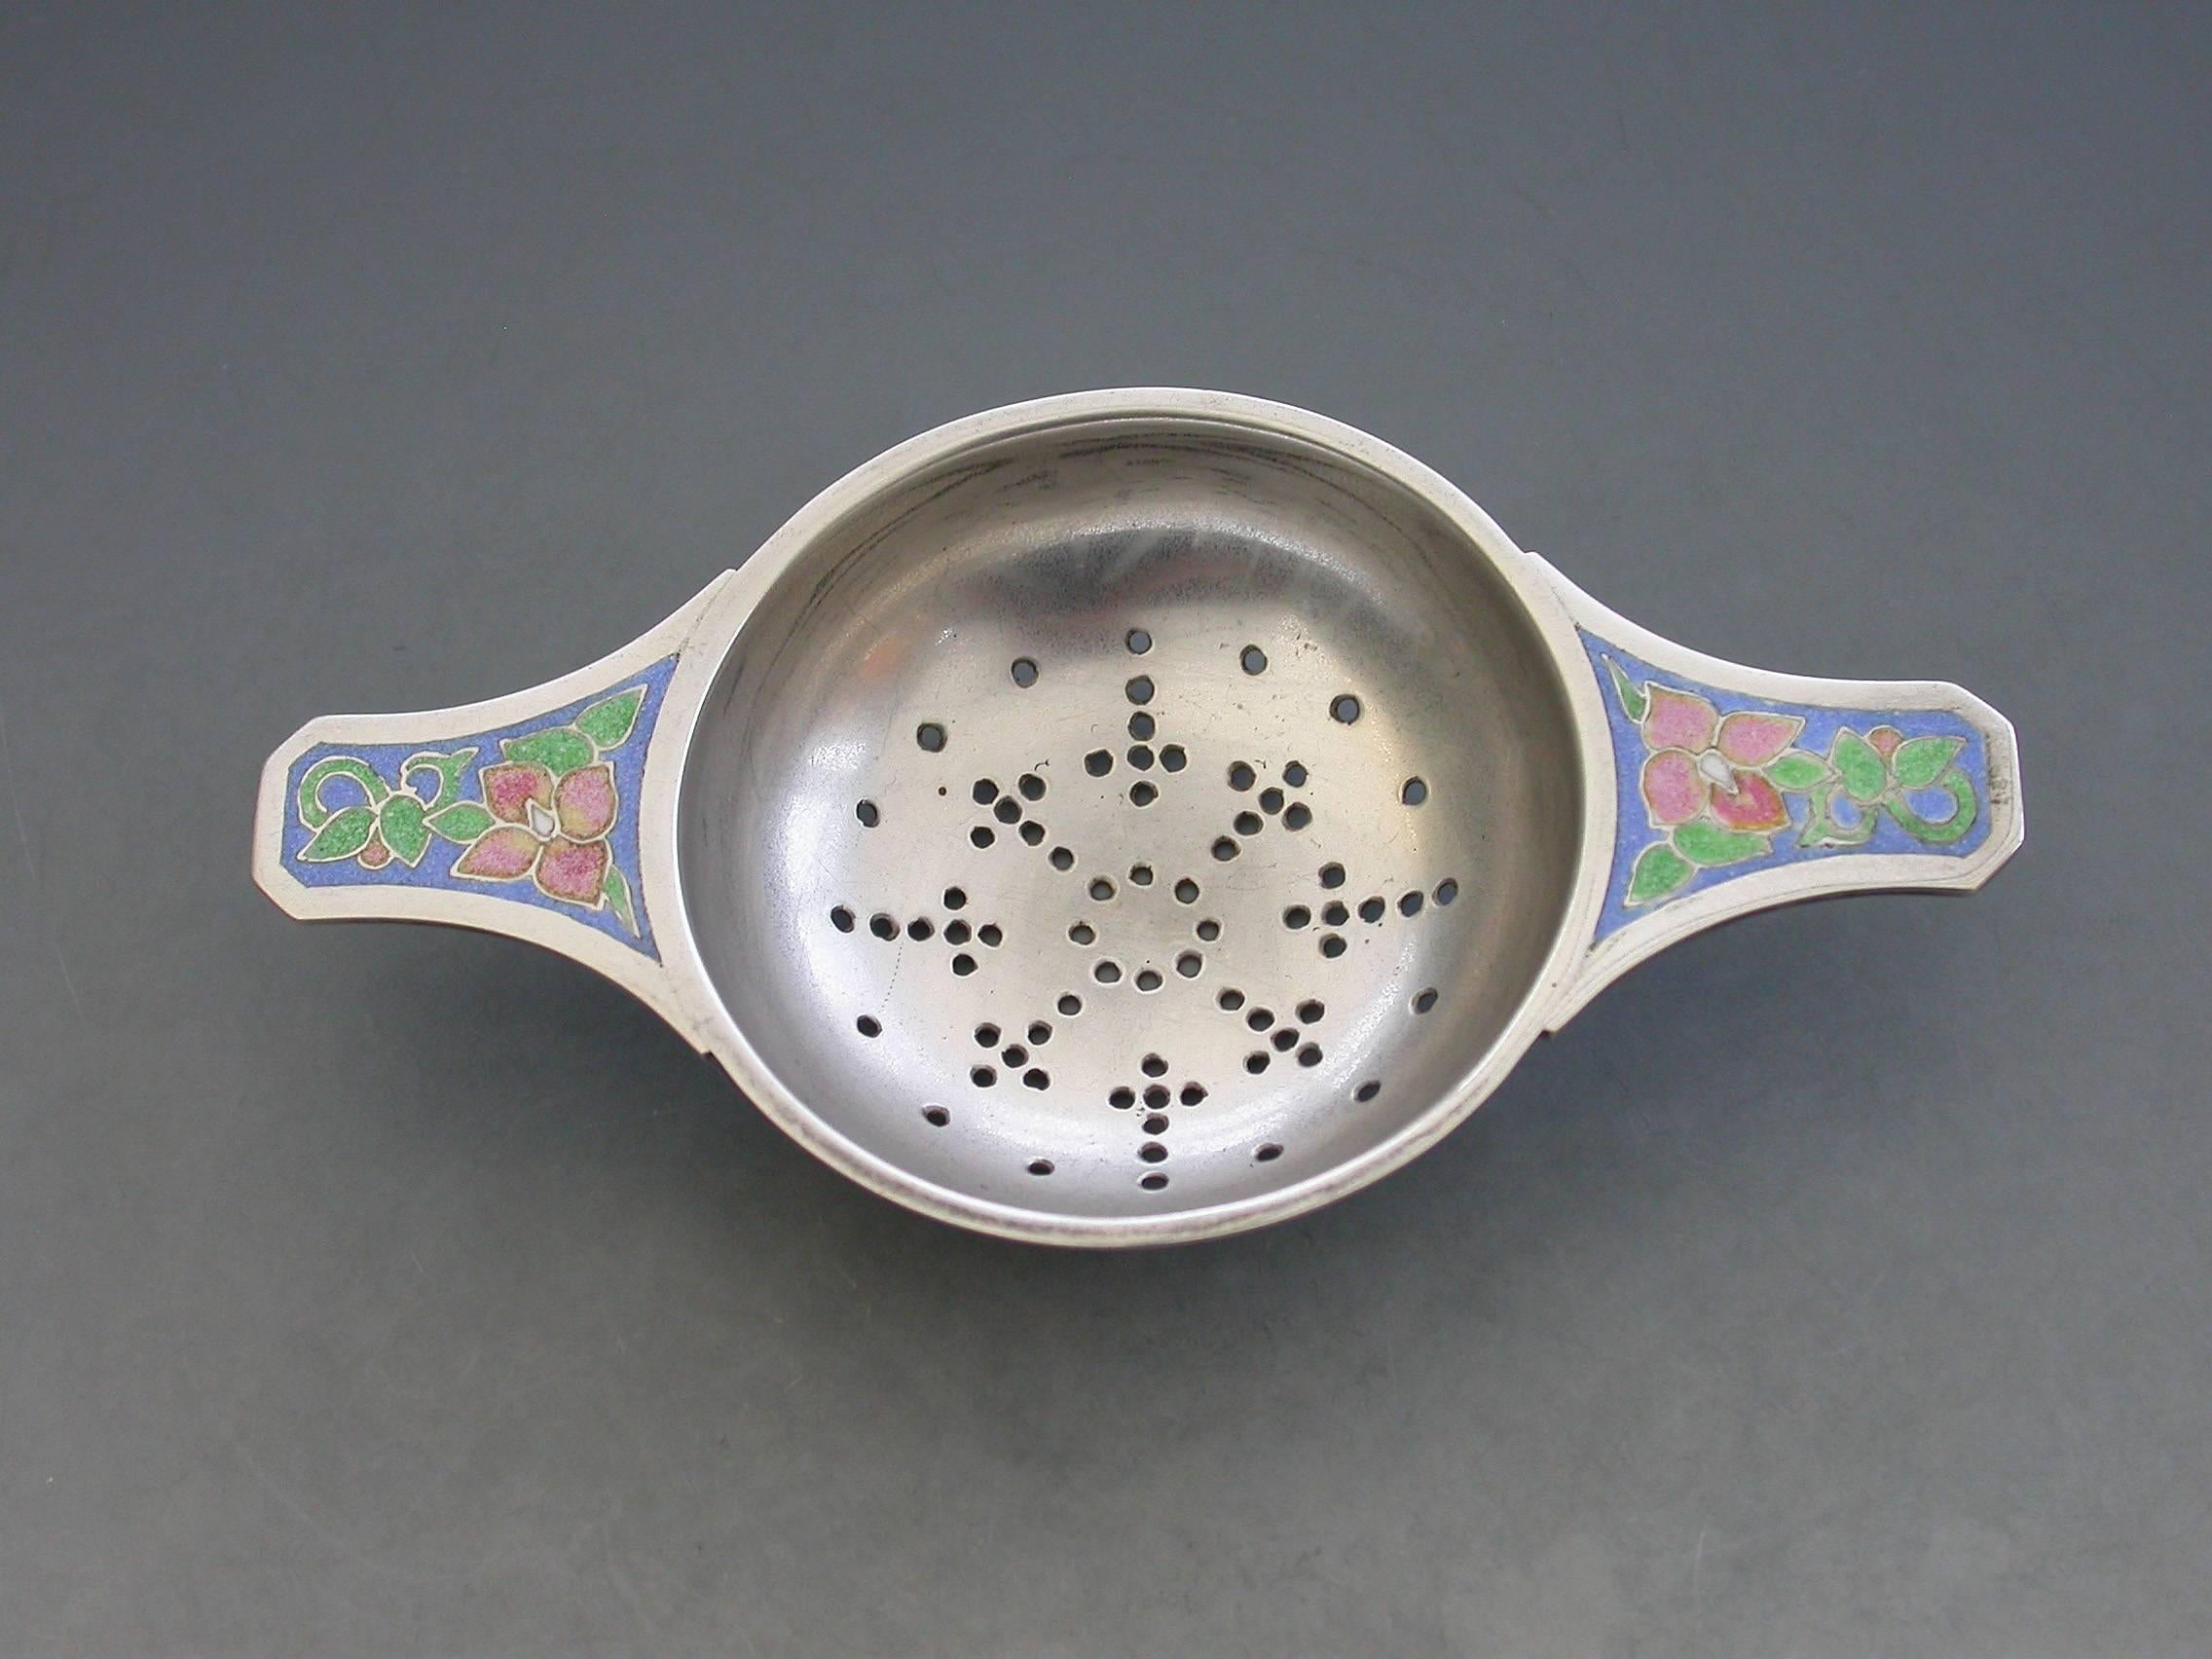 Arts and Crafts 20th Century Arts & Crafts Silver & Enamel Tea Strainer by Bernard Instone, 1930 For Sale